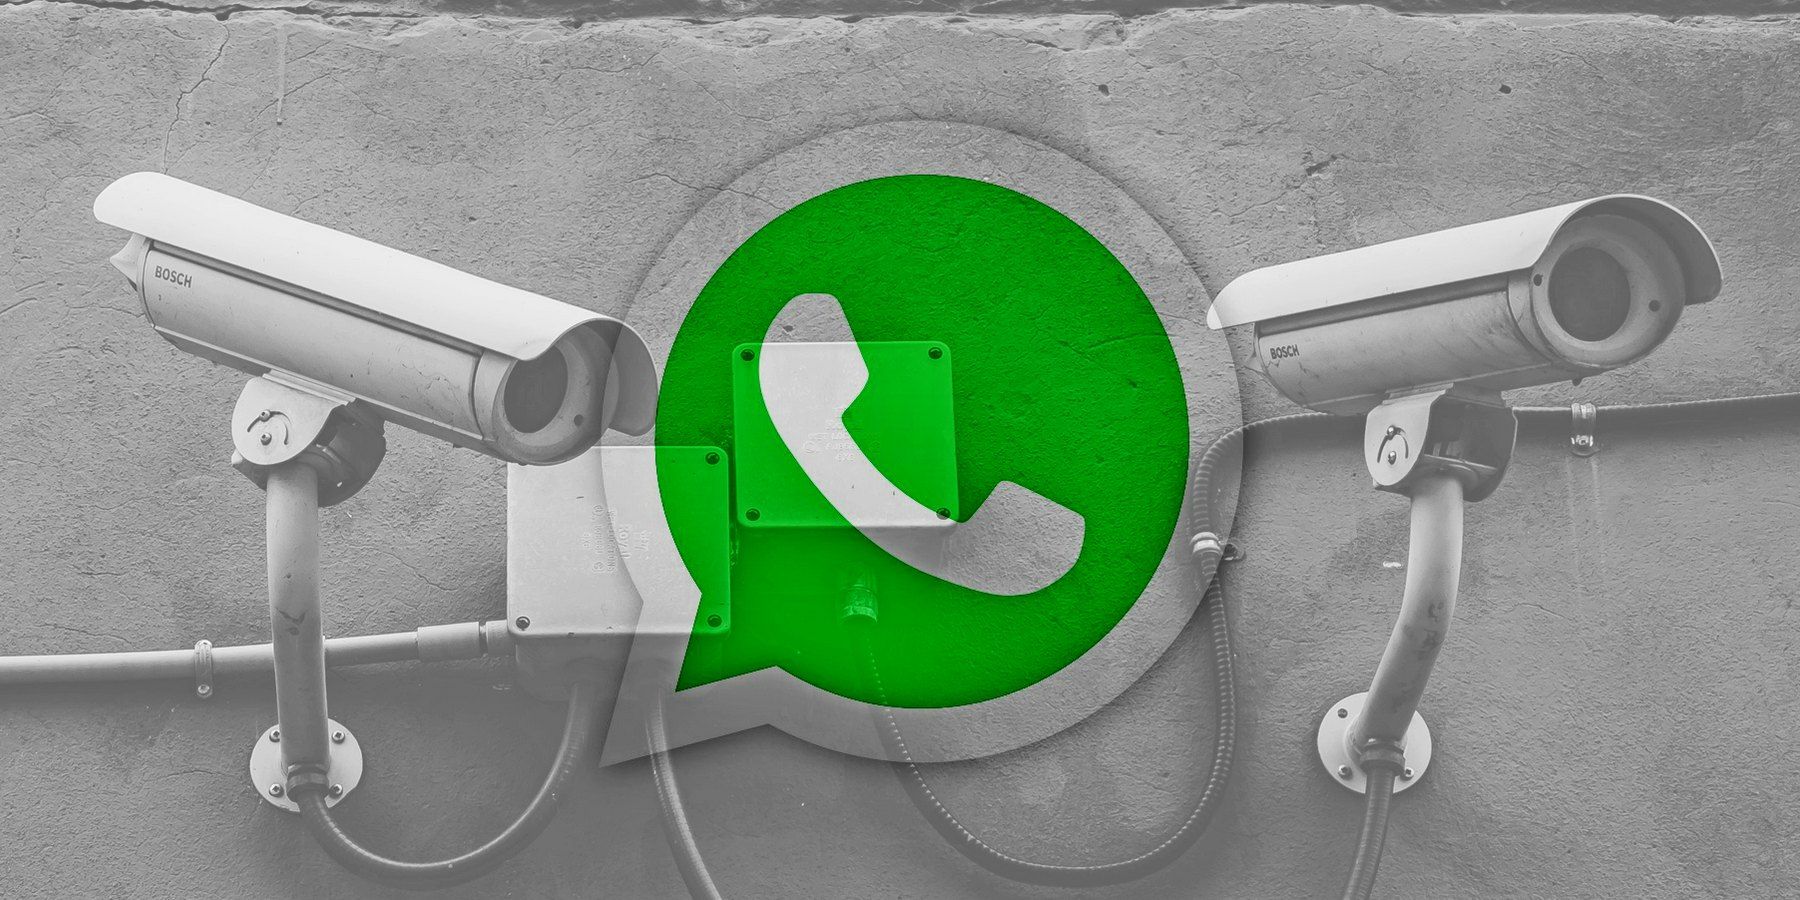 WhatsApp Can Apparently Read Your Messages, But Only If One Is Reported